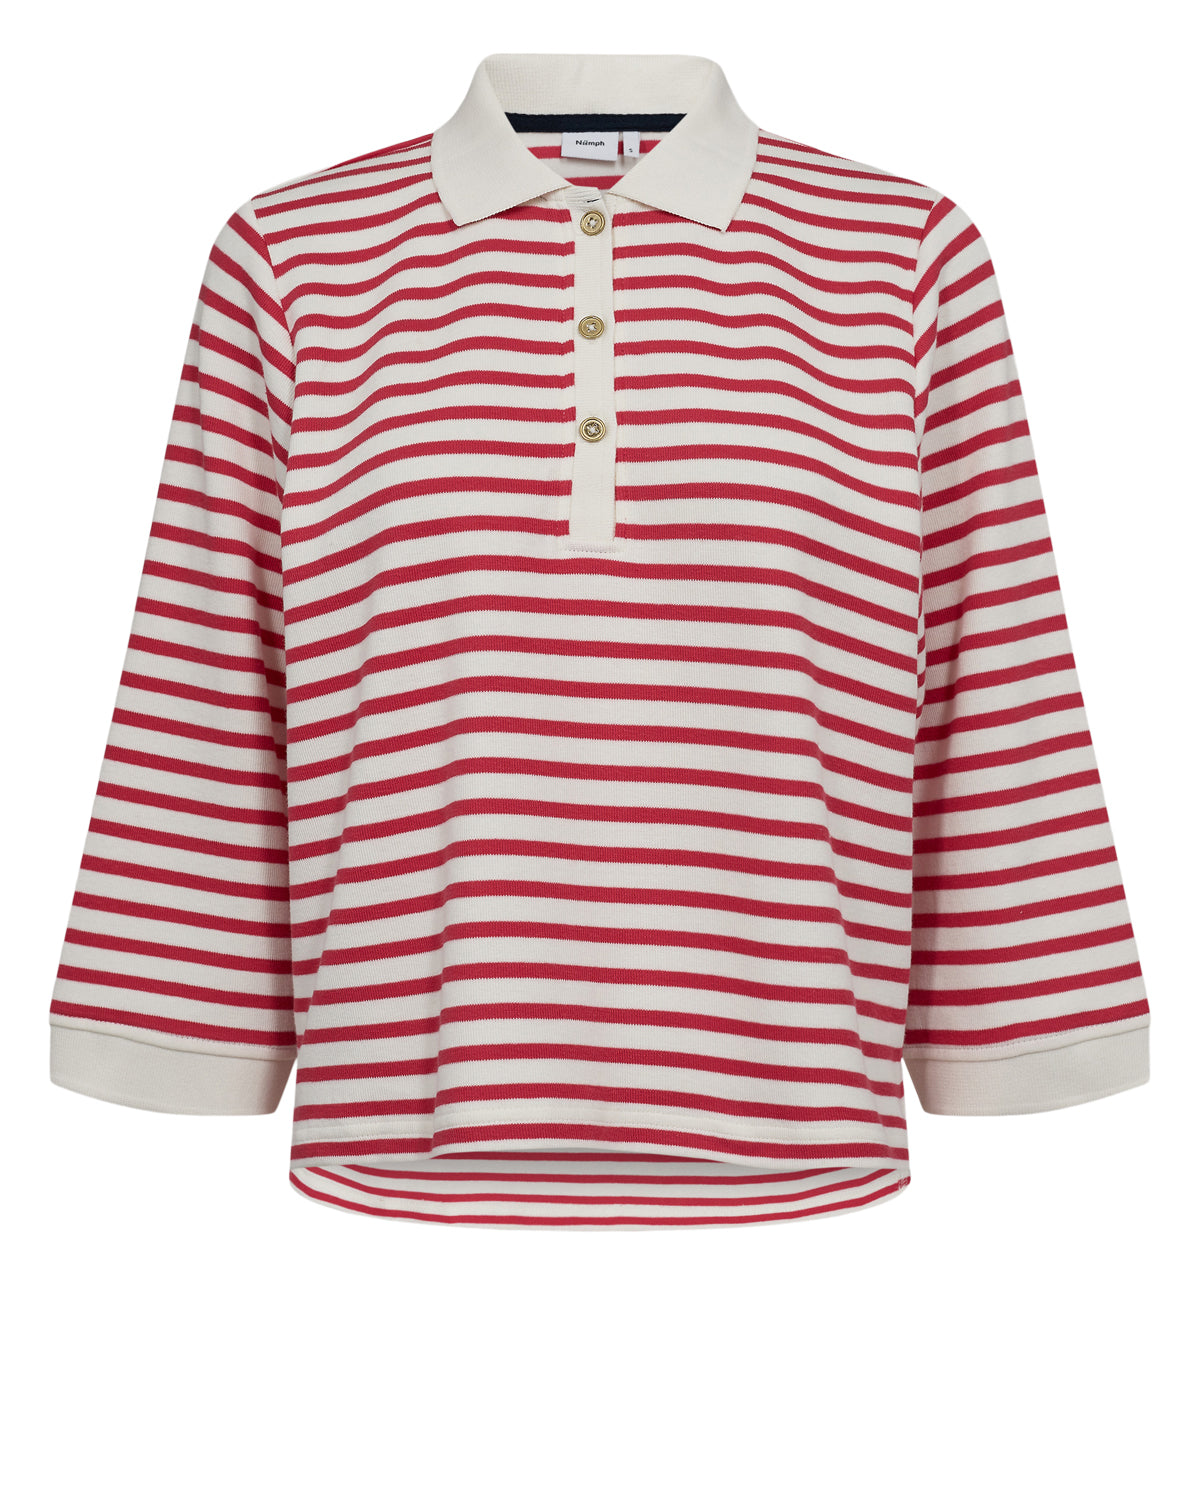 Nümph Nuvicky Polo Shirt, Red